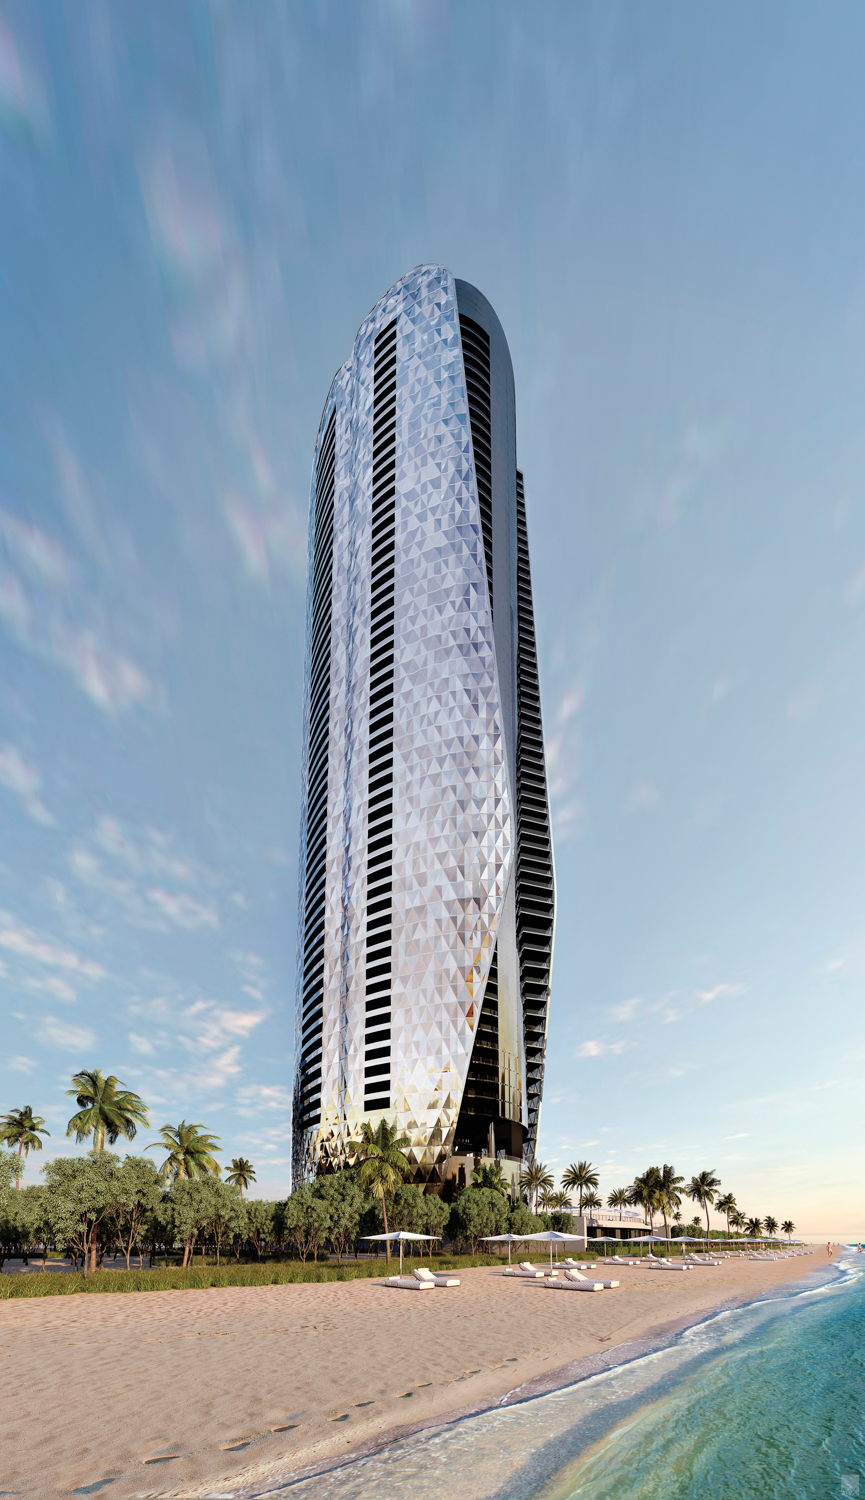 70-story high-rise along the beach soaring above palms and greenery